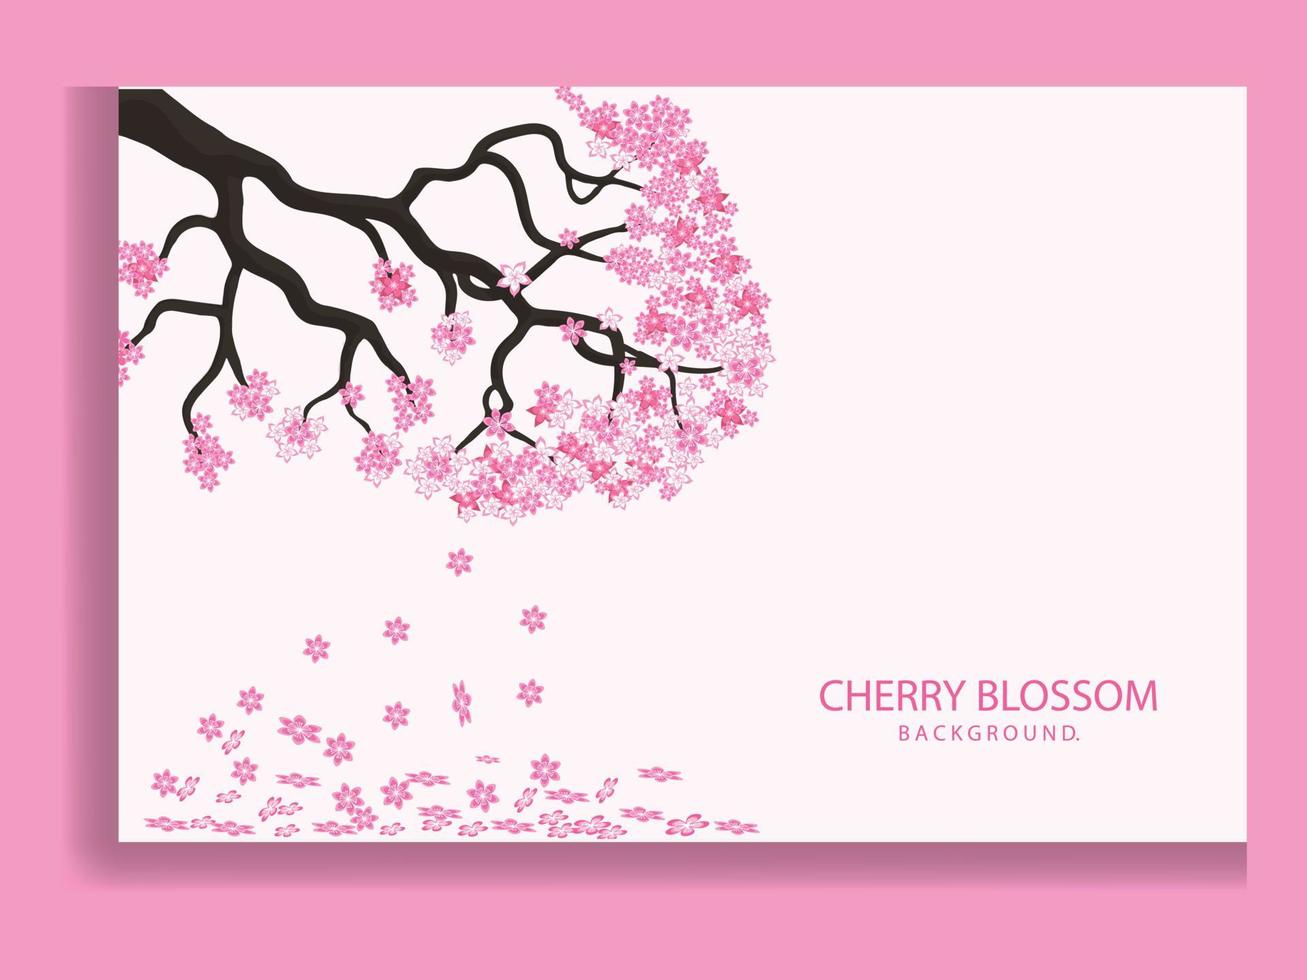 Sakura blossom branch. Falling petals, flowers. Isolated flying realistic japanese pink cherry or apricot floral elements fall down vector background. Cherry blossom branch, flower petal illustration